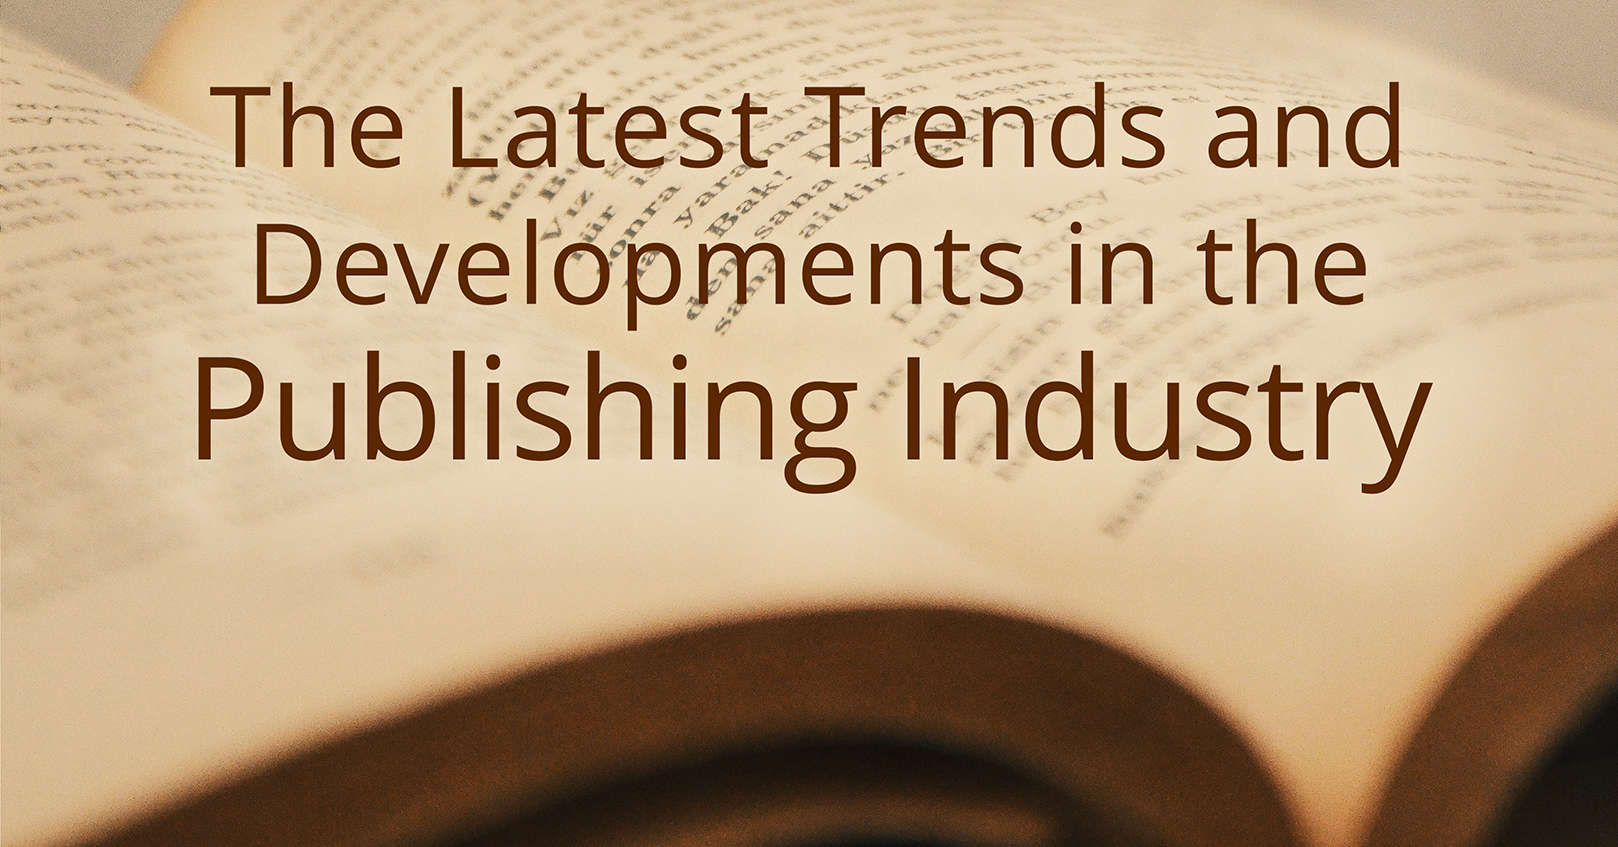 trends and developments in the publishing industry